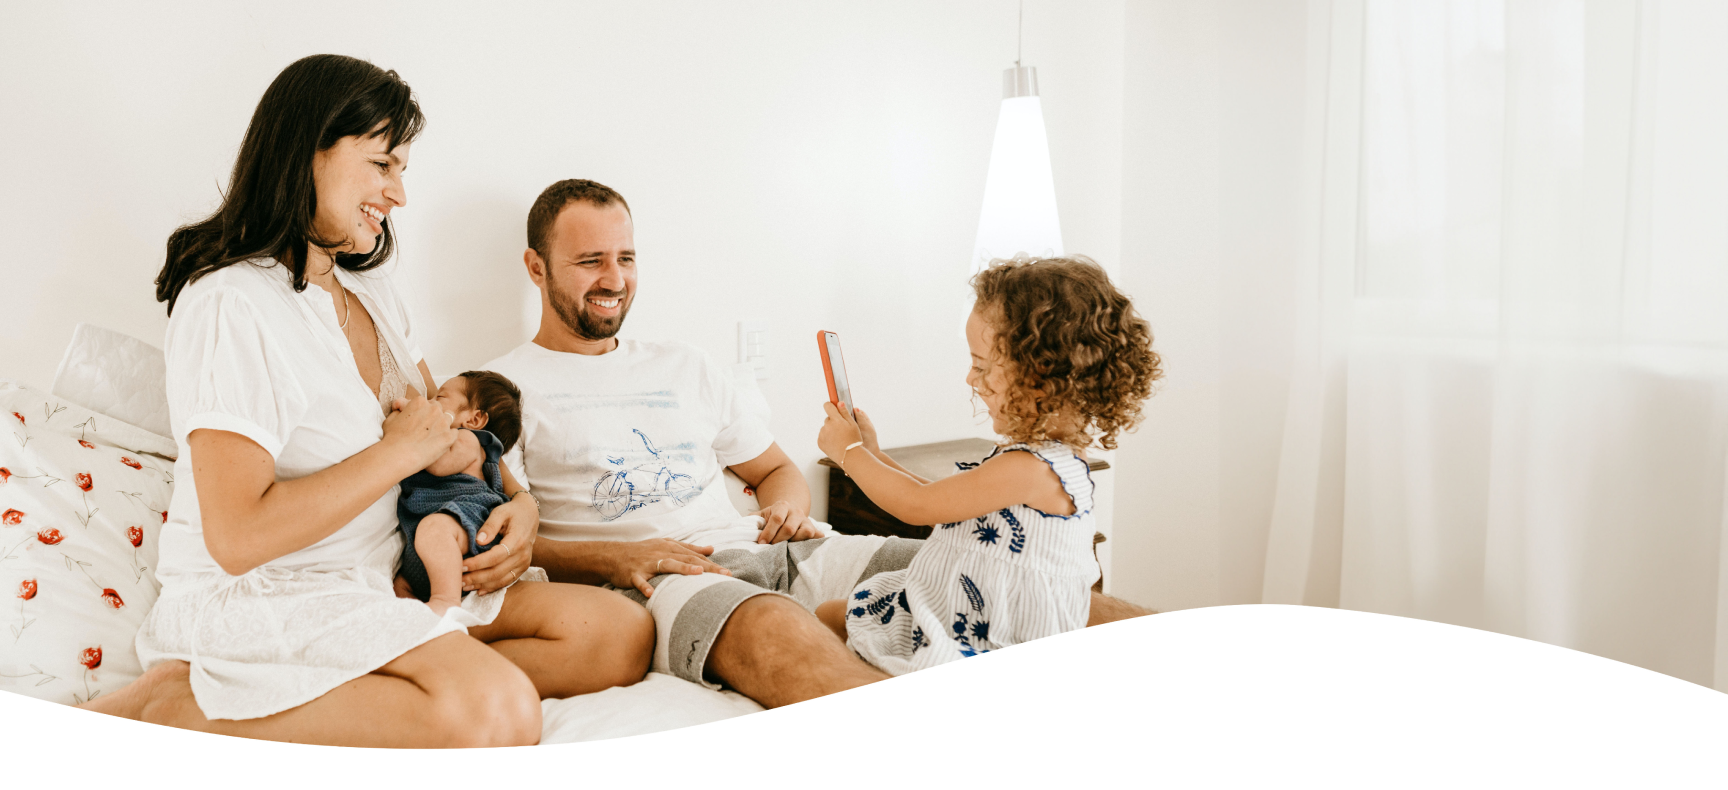 A happy family sharing a moment for their baby book, with a toddler taking a photo to add to their family album, capturing the essence of cherished family memories.